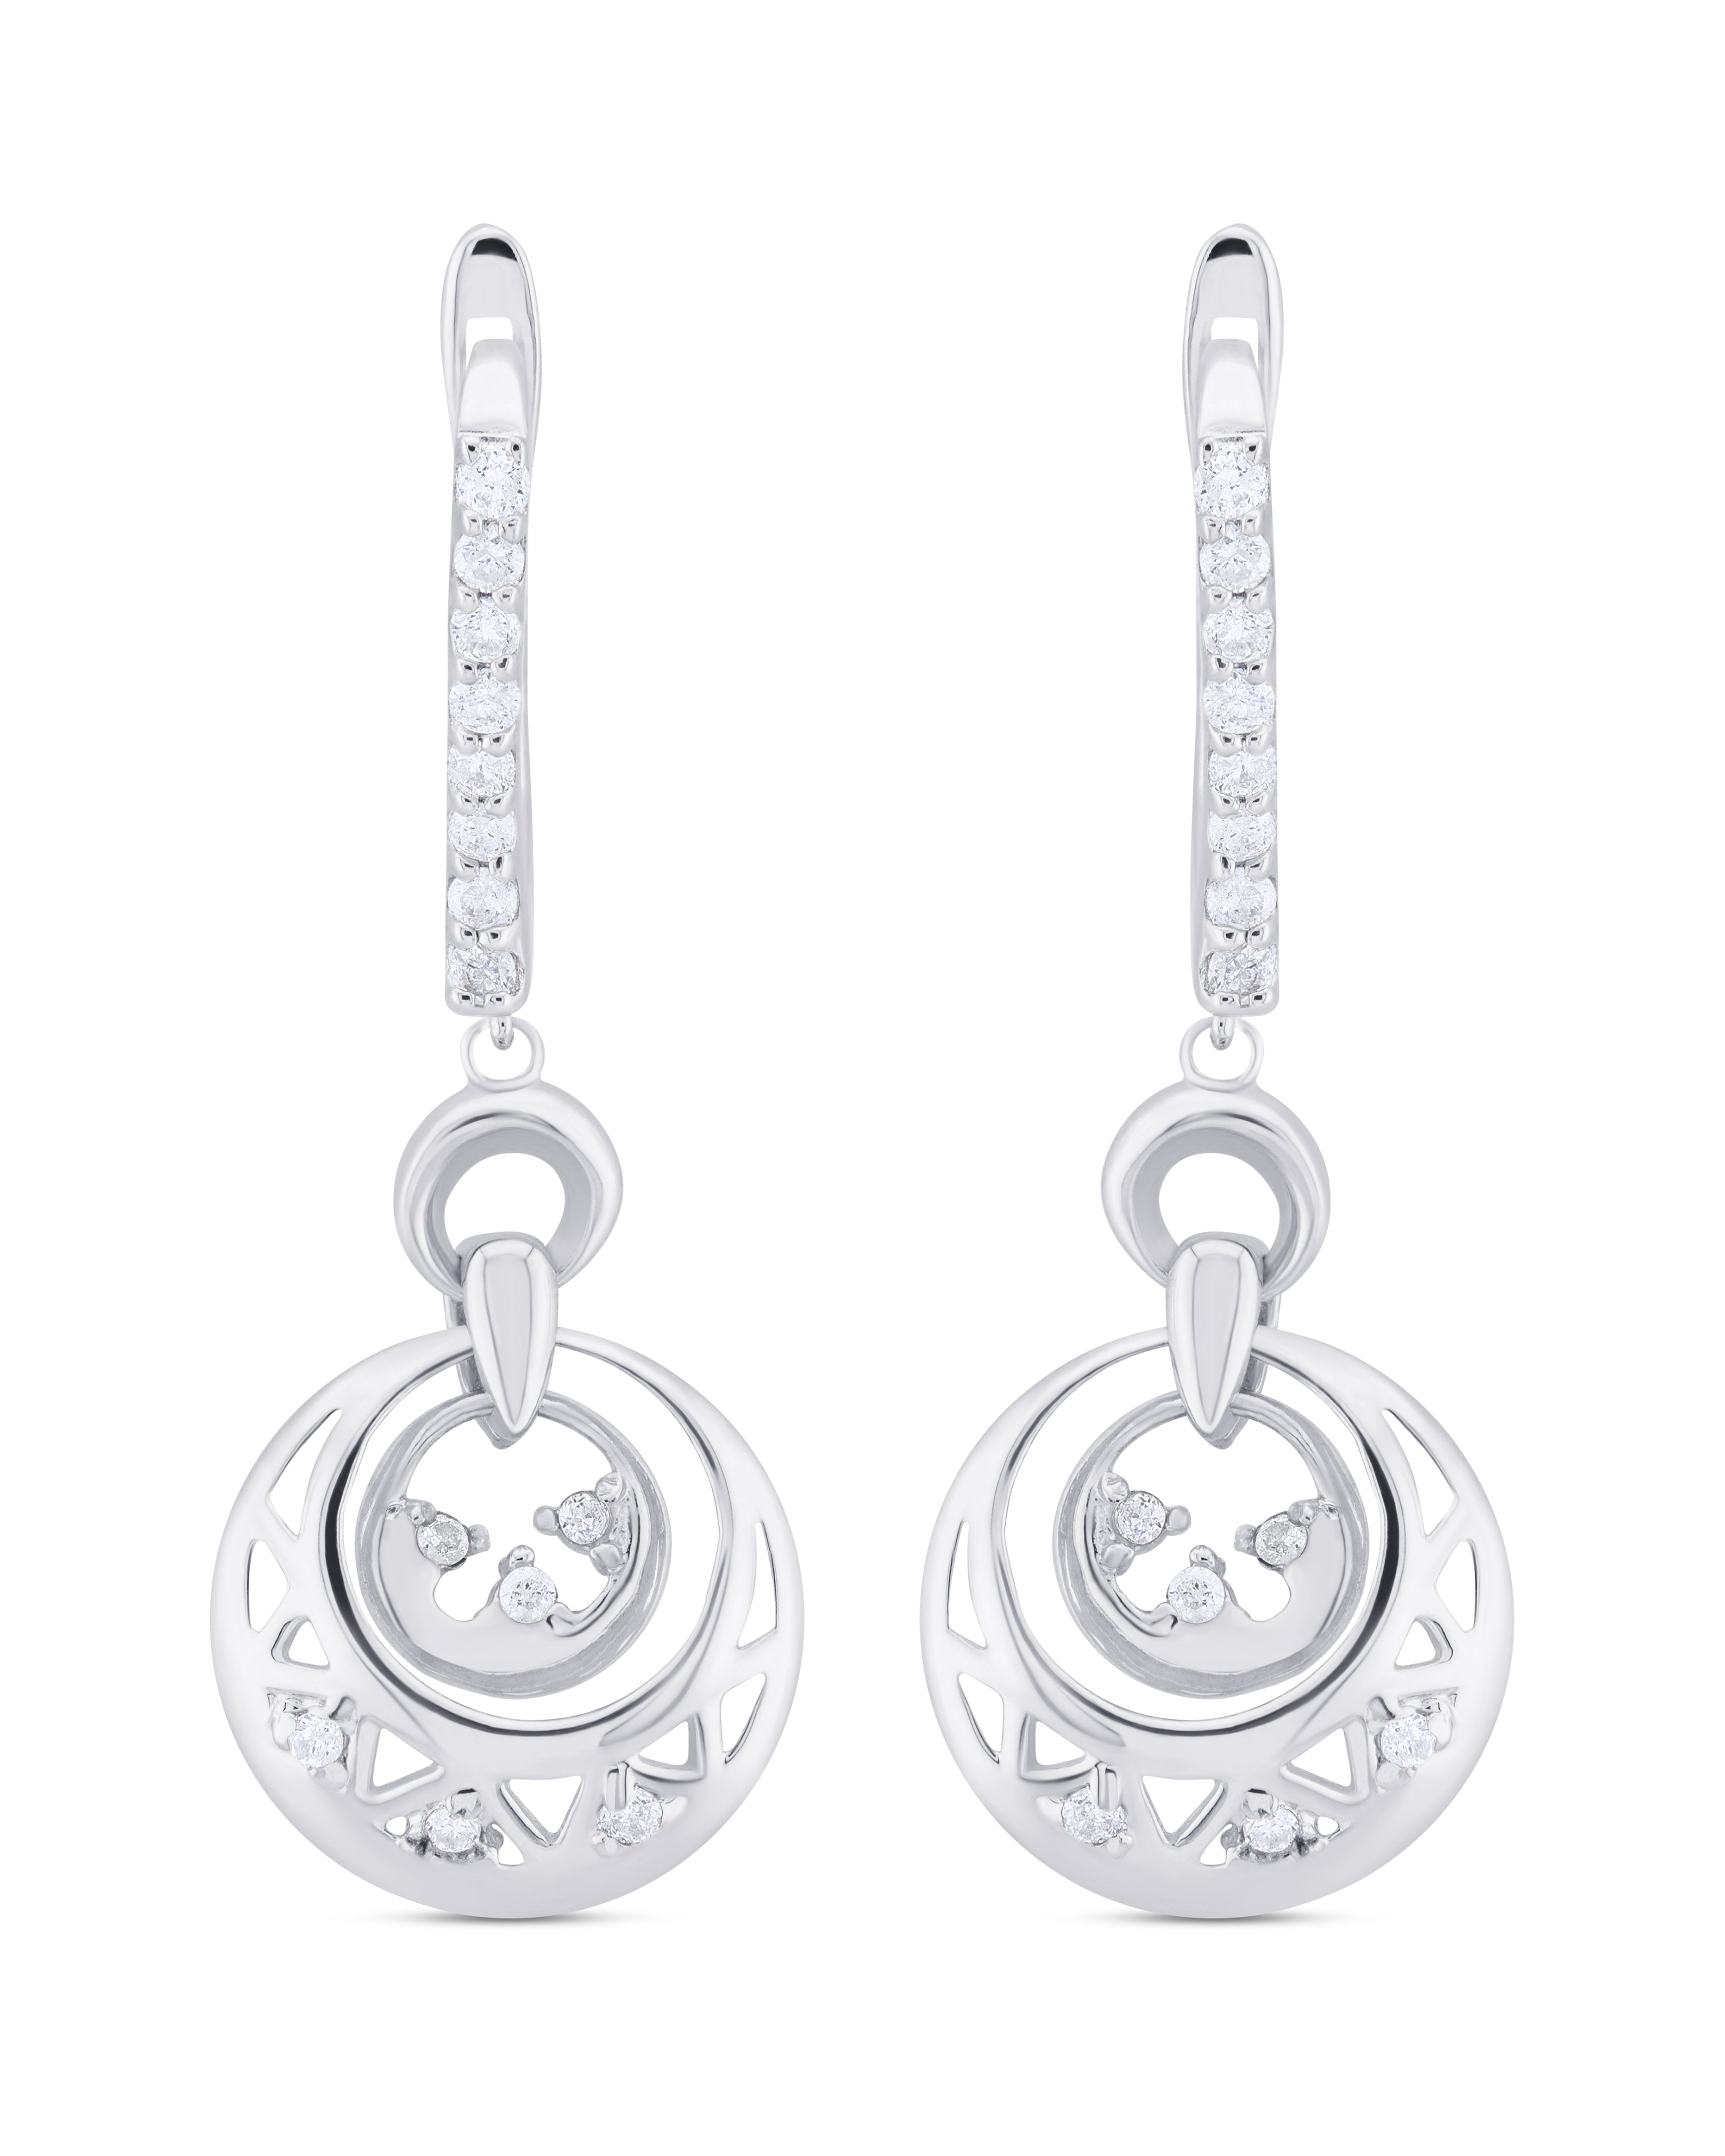 AMORE- Spin and Swirl Earrings